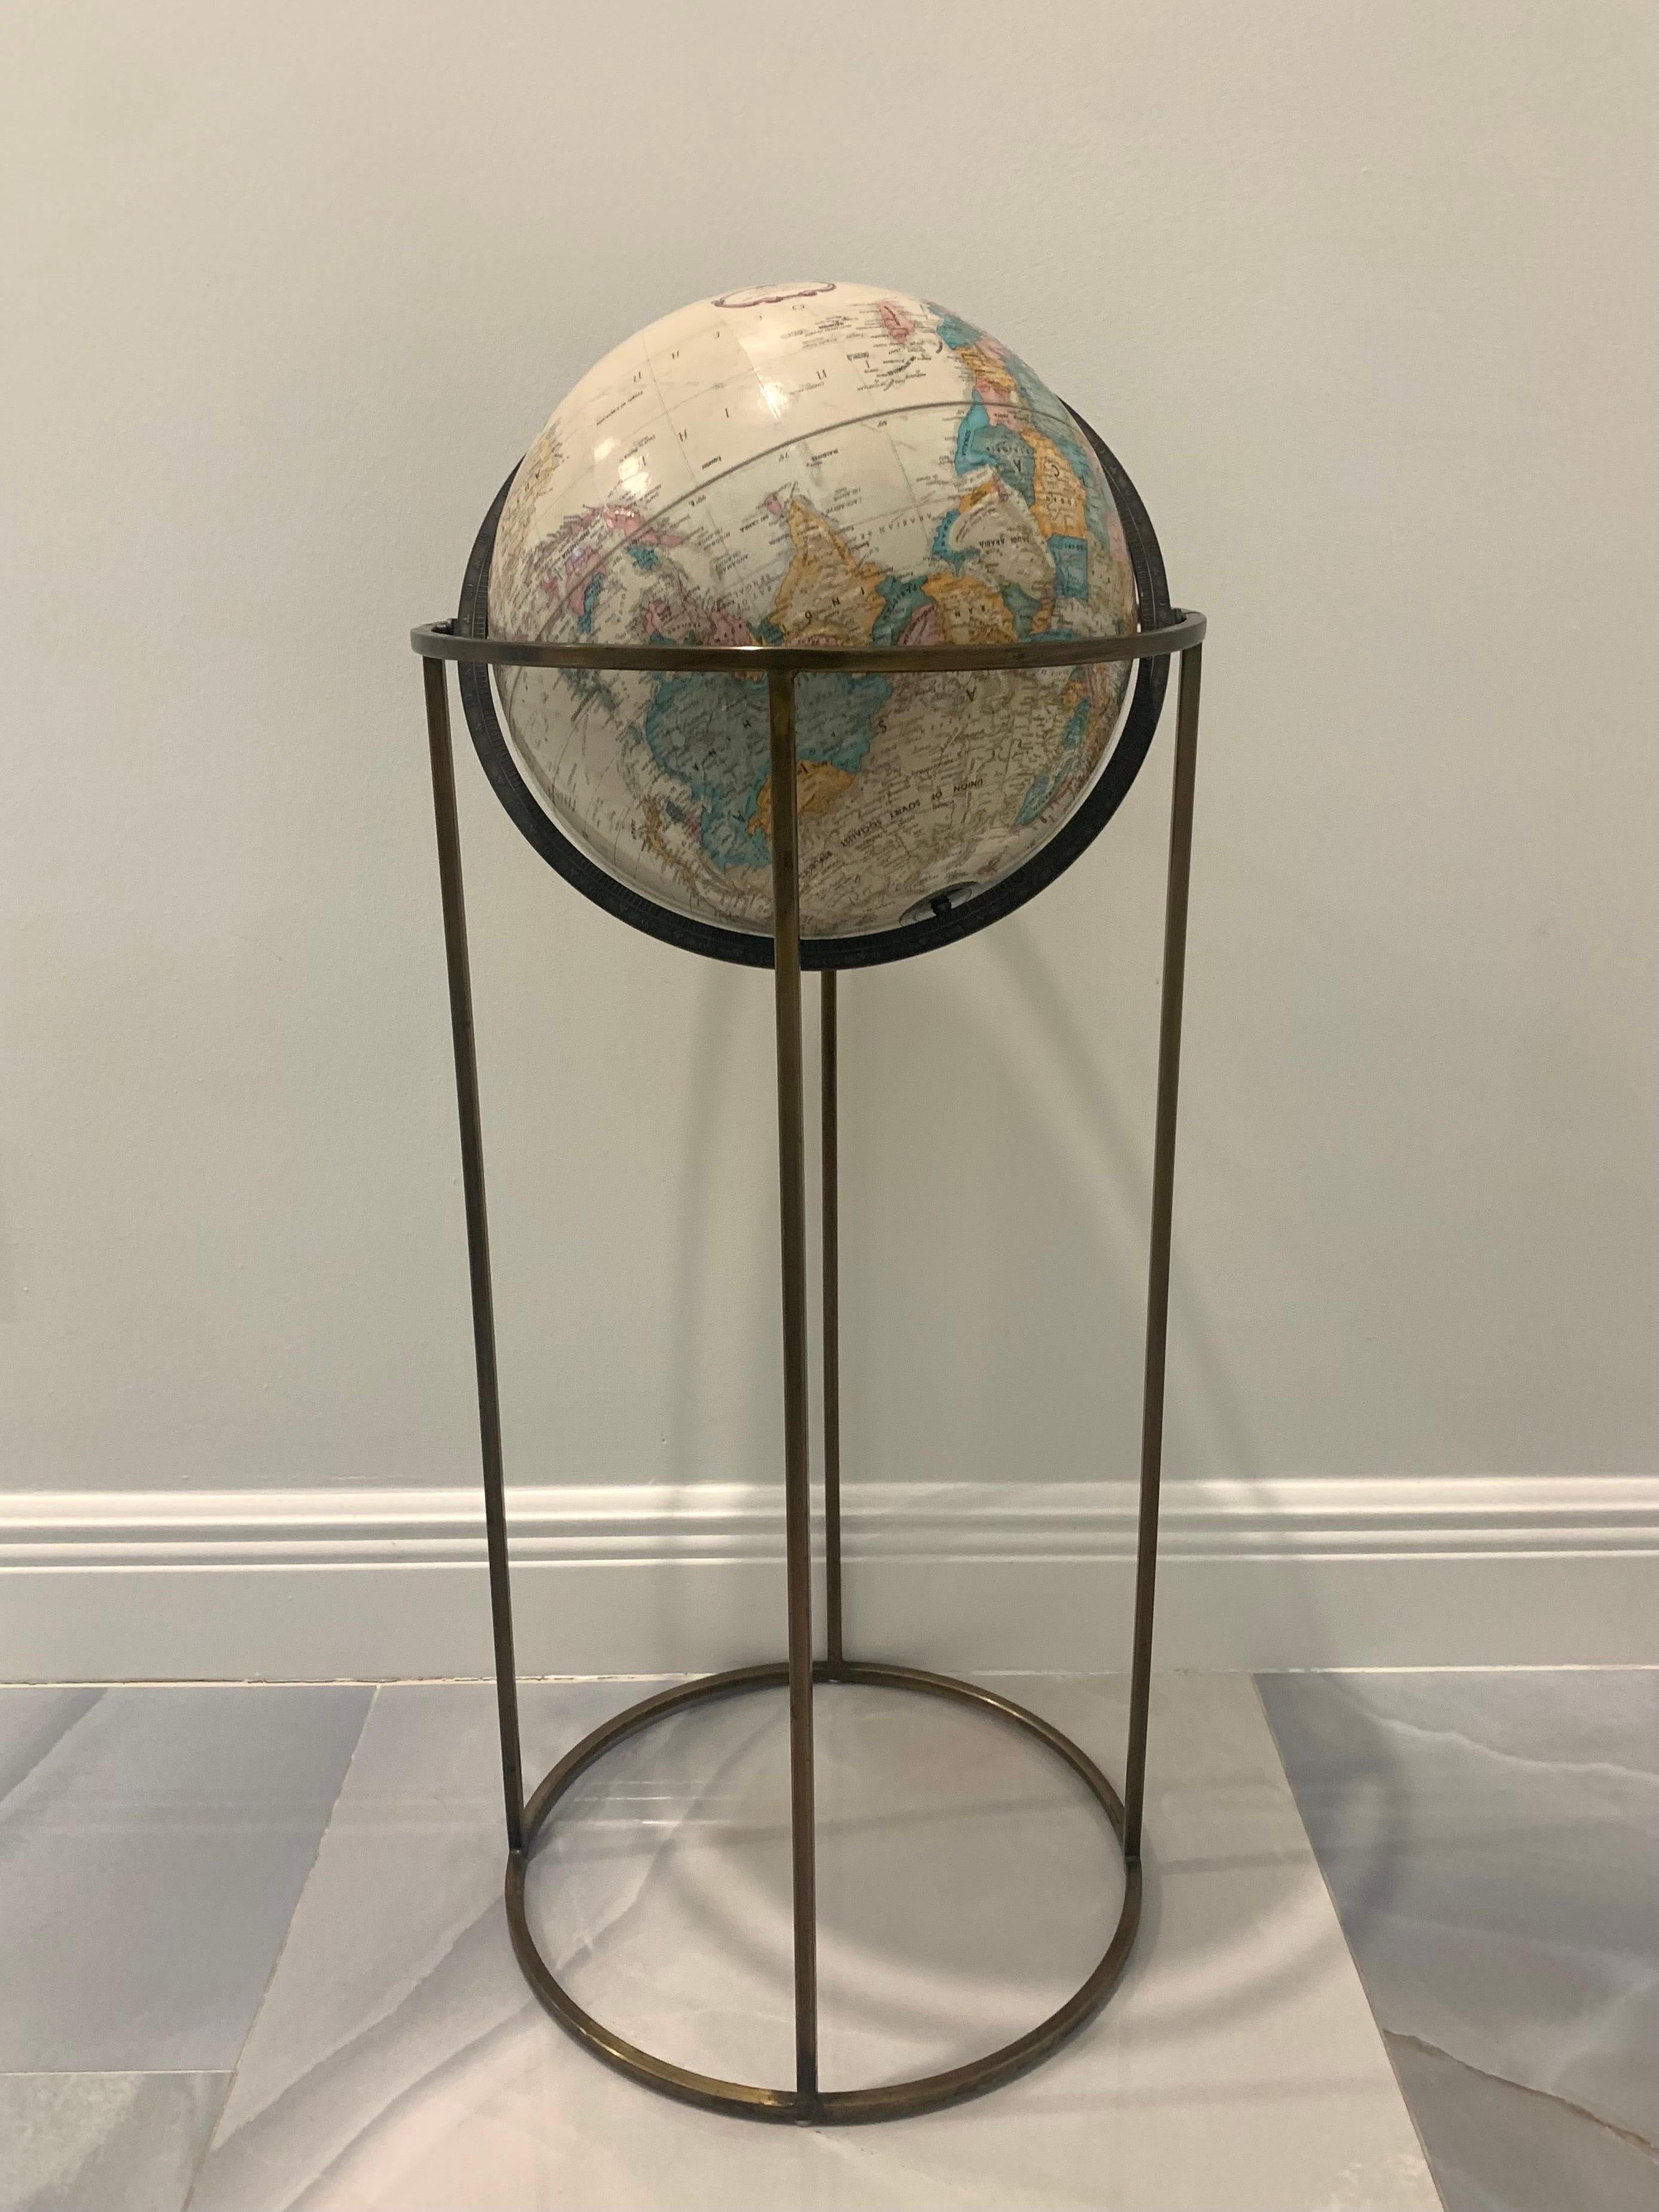 World globe by Replogle in the style of Paul McCobb. Made in the USA circa 1970s. Signed. 

Beige globe with textured topography. Supported by a swivel stand in antiquated brass. Featuring square tube design made popular by McCobb. 

